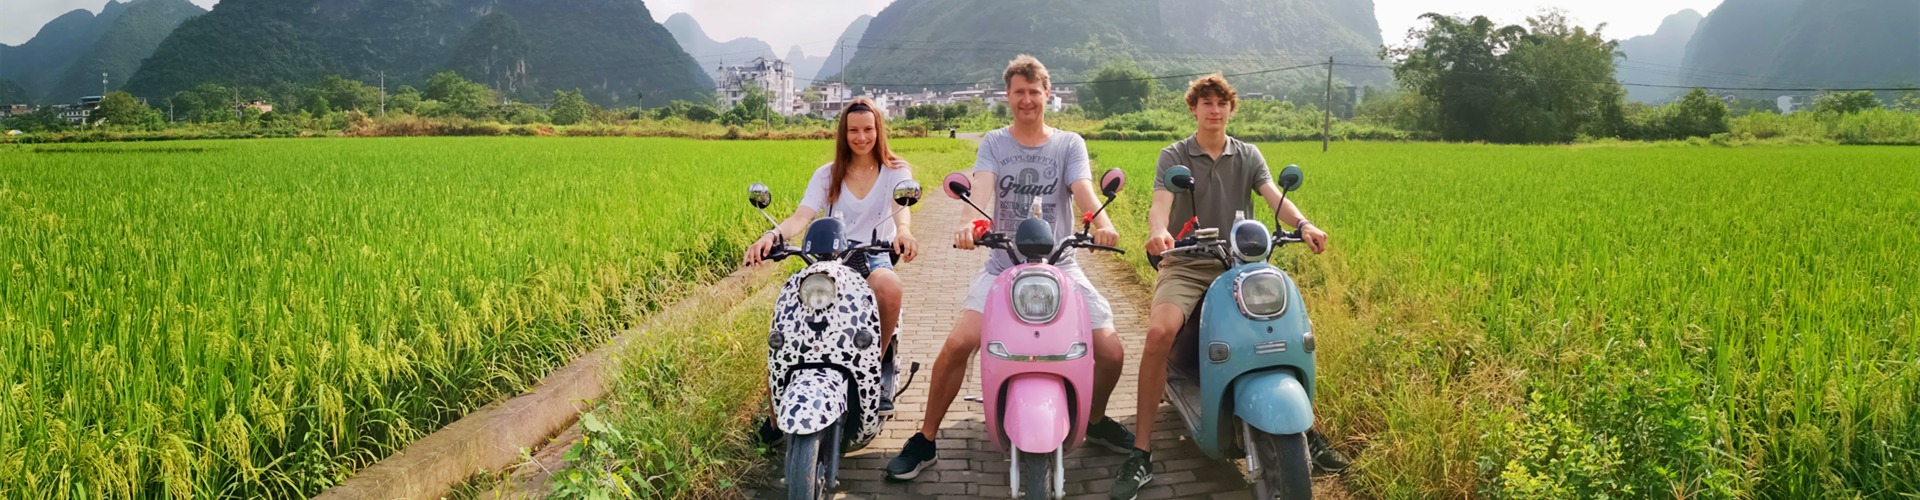 The Best Means of Transportation in Guilin - Trippest Guilin Travel Guide